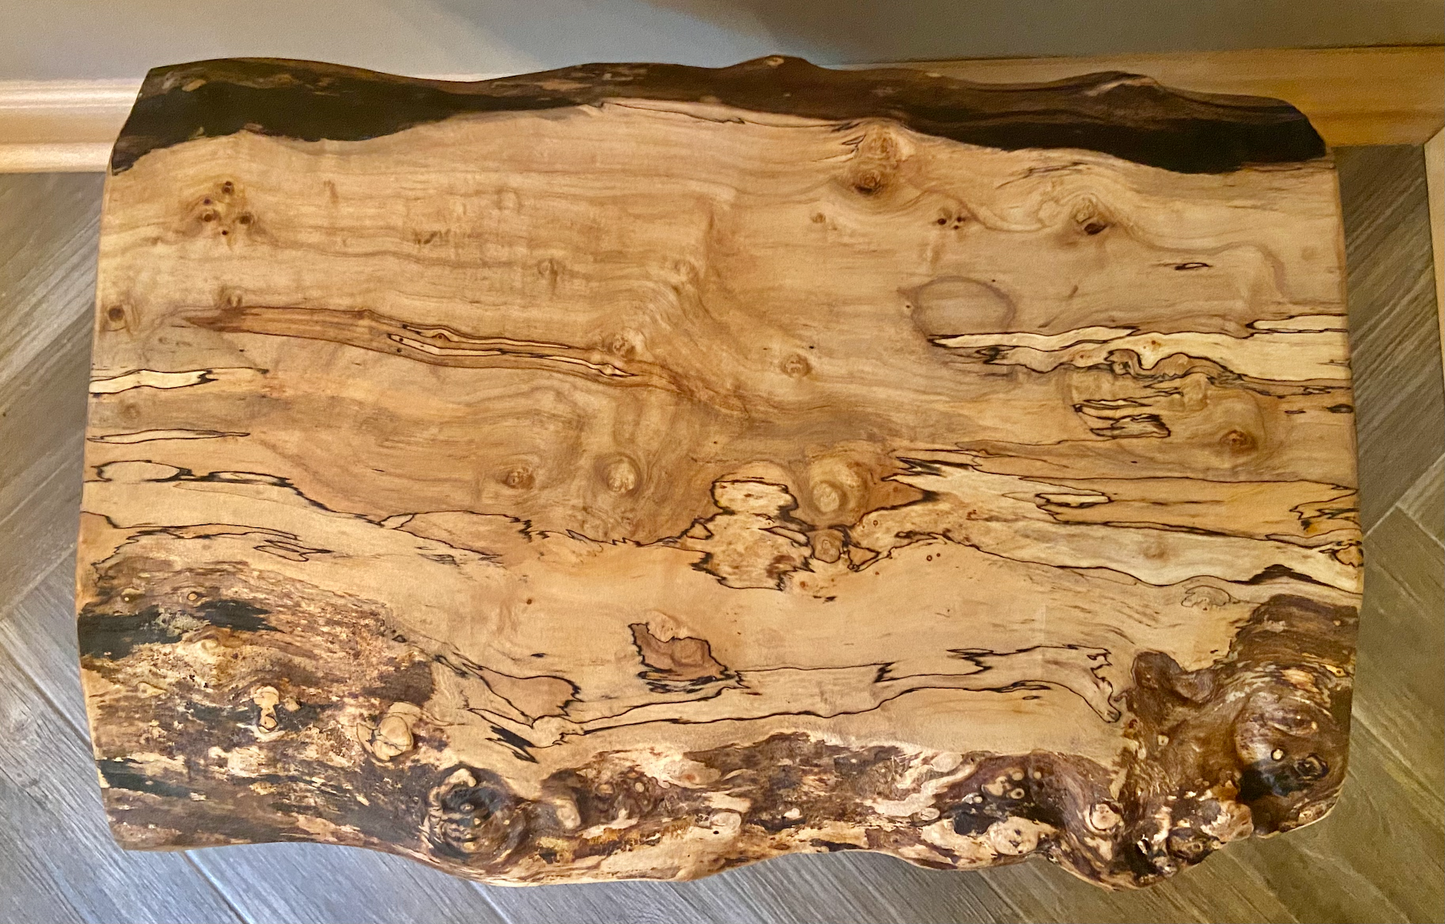 Small Unique Live Edge Spalted Maple End Table - 24" x 16" (SOLD)